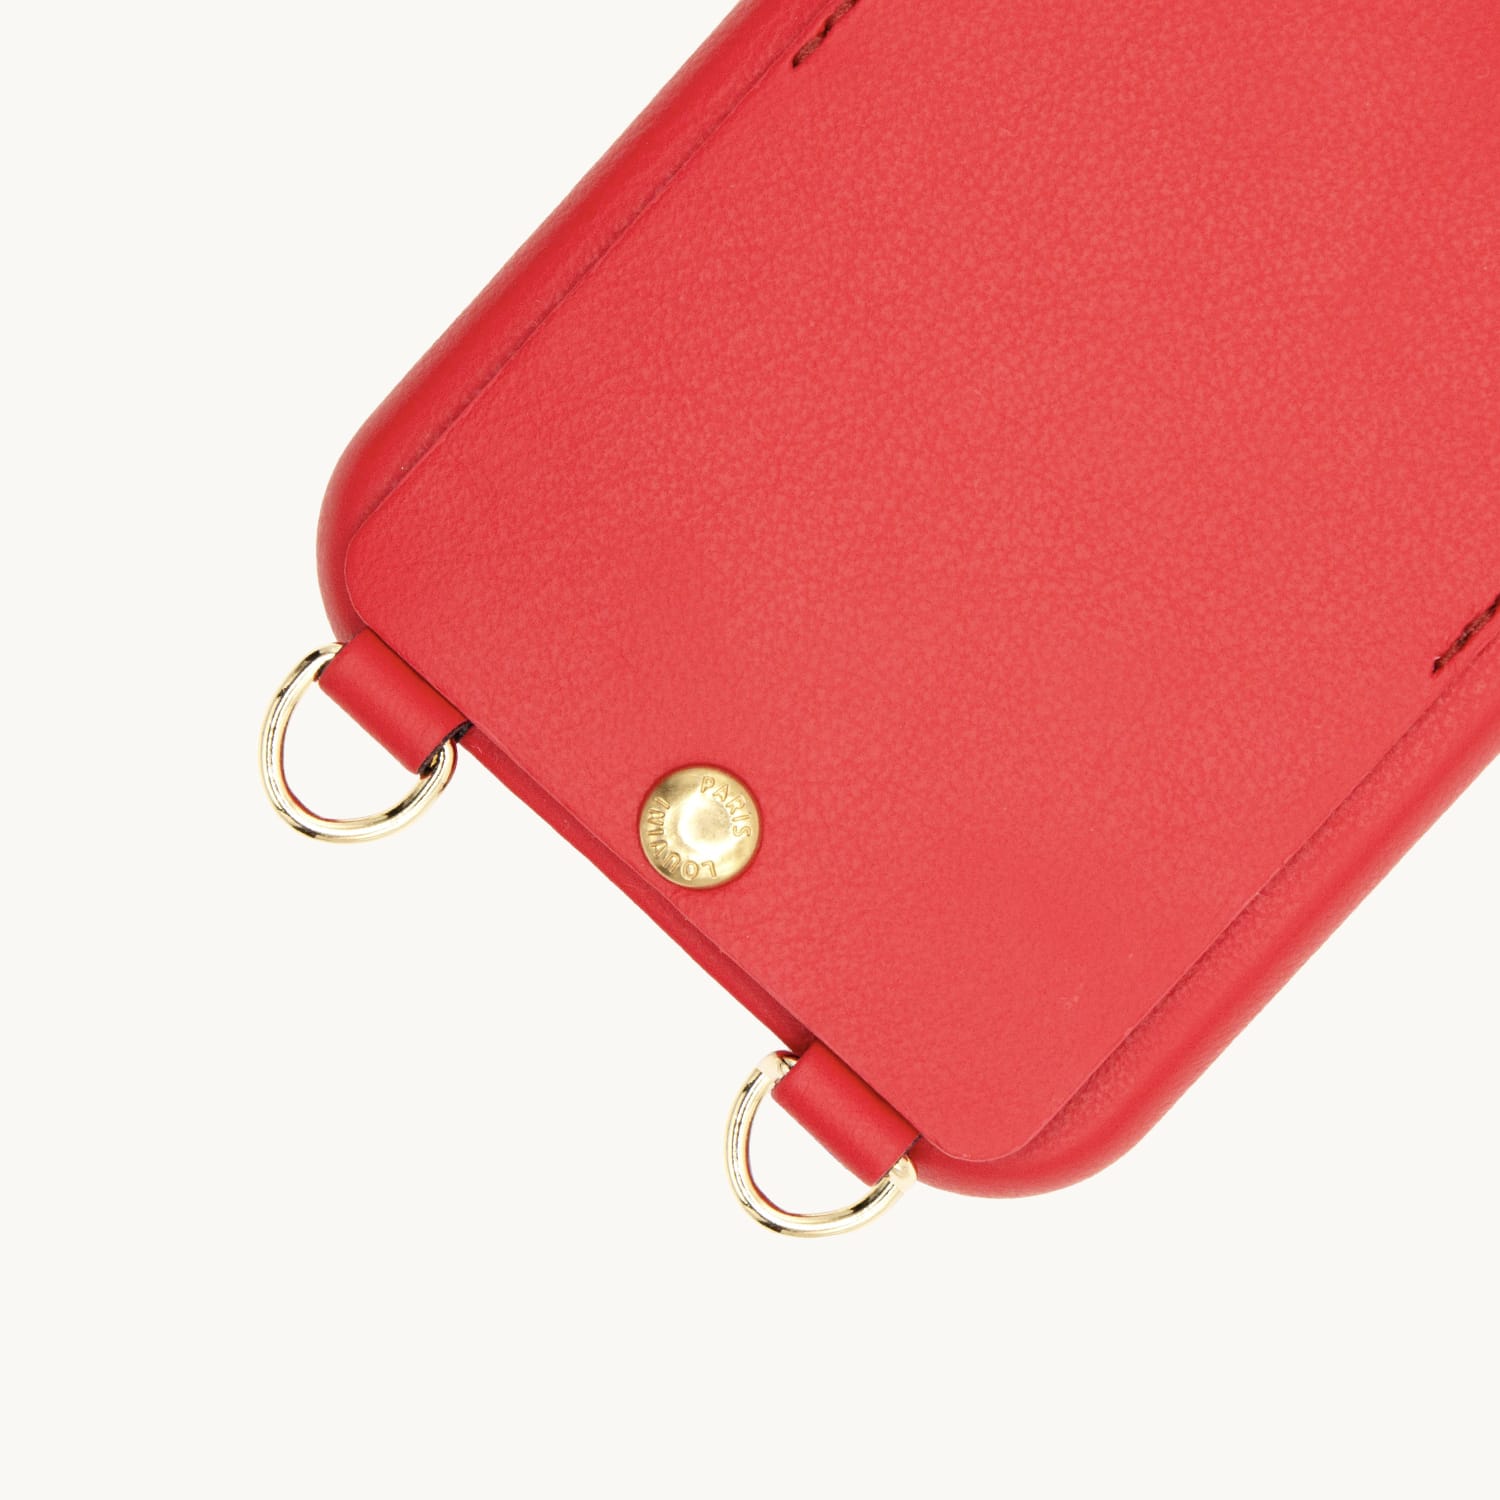 LOU Red Leather Case & TESSA Red New Cord